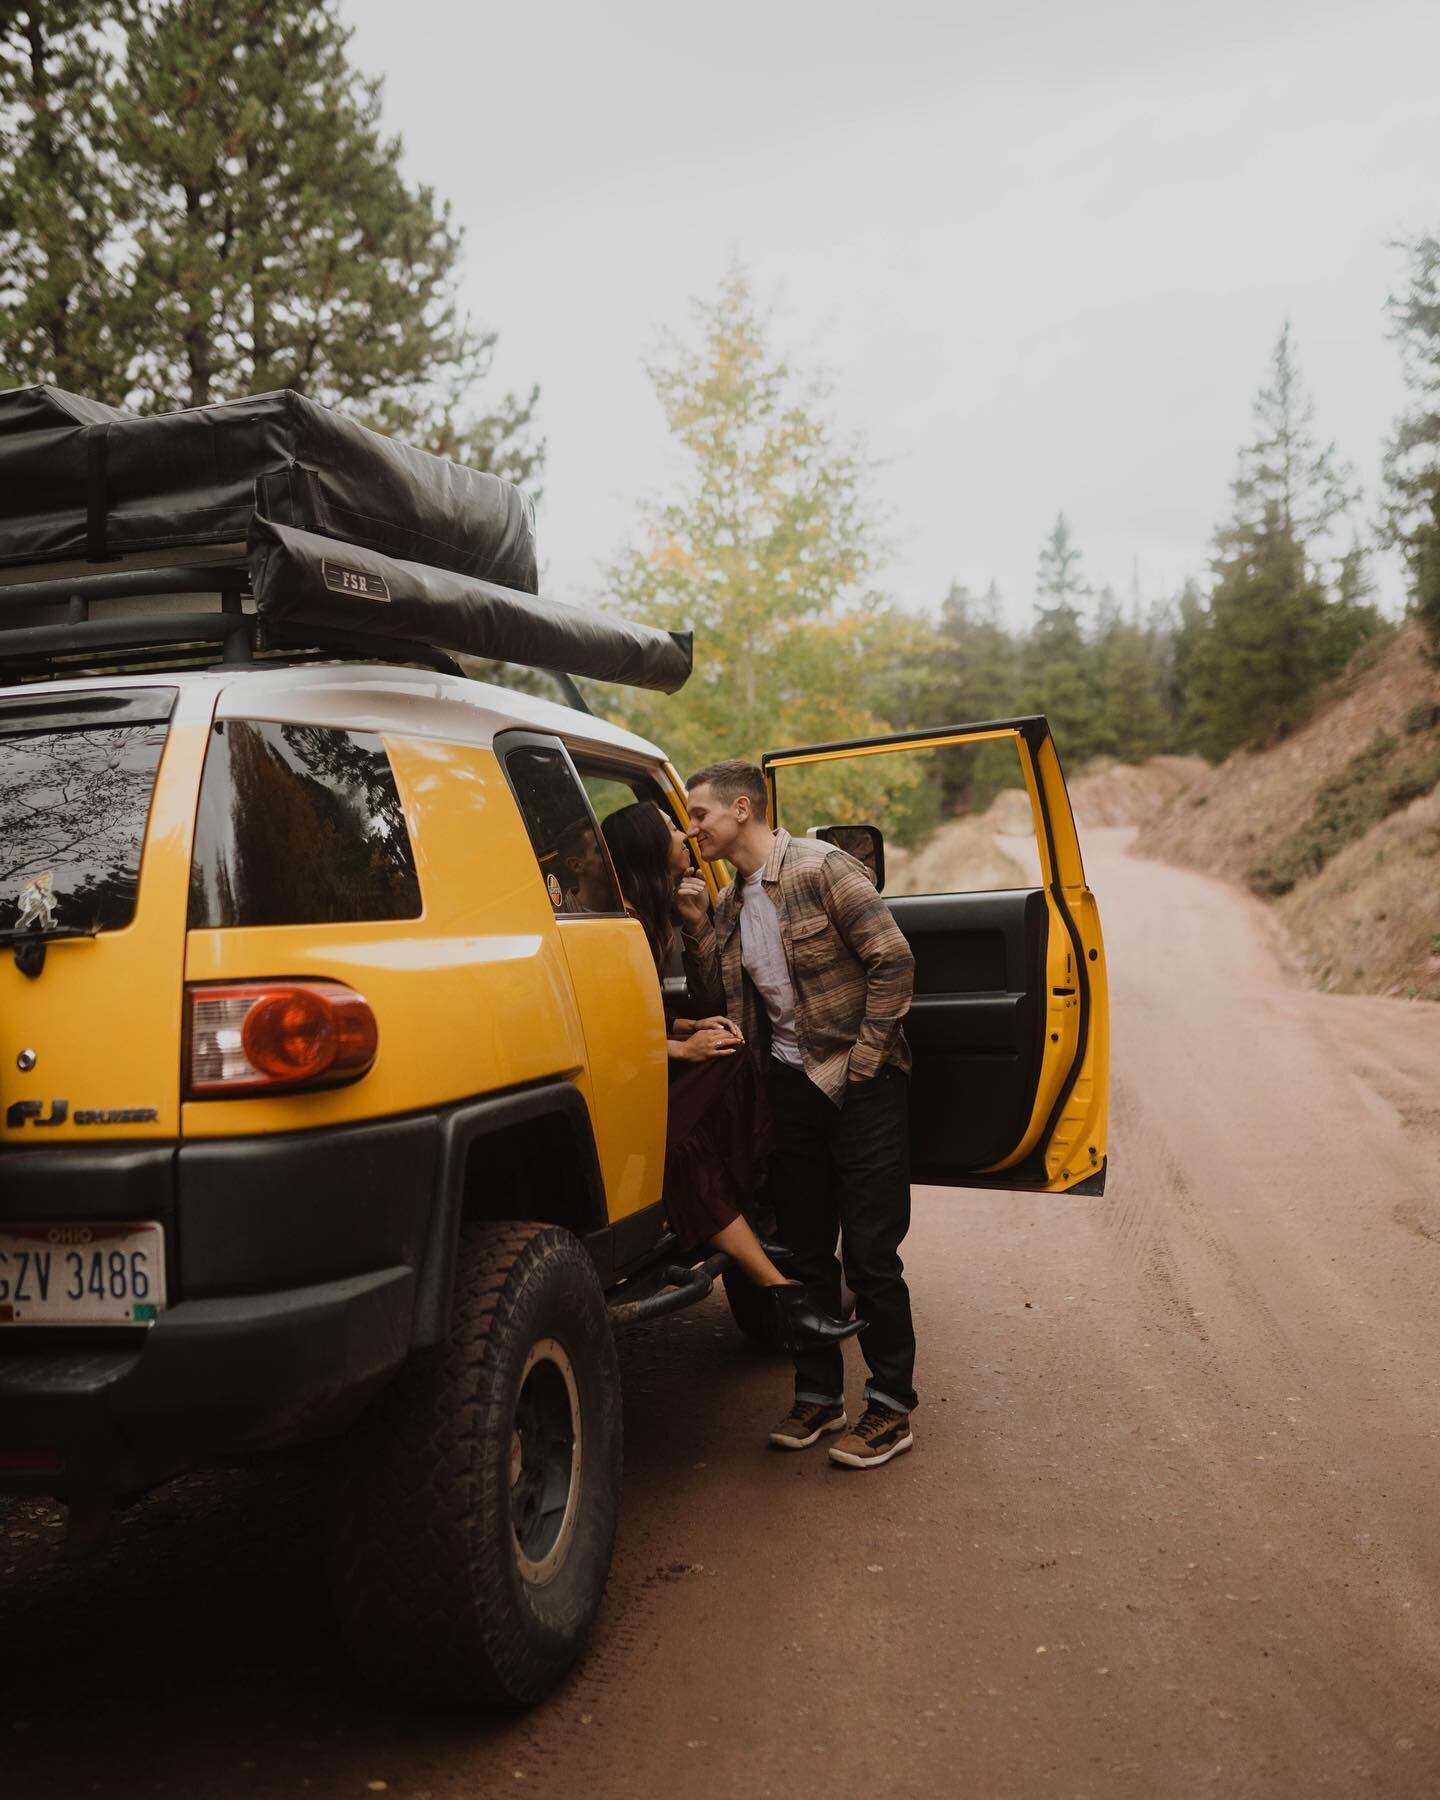 Bringing the yellow FJ out to play in Breck&rsquo;s fall colors.  Can&rsquo;t find a better combo 🚖🍂

#breckenridge #boreaspass #coloradoengagementphotographer #adventuresession #FJ #falllove #candid